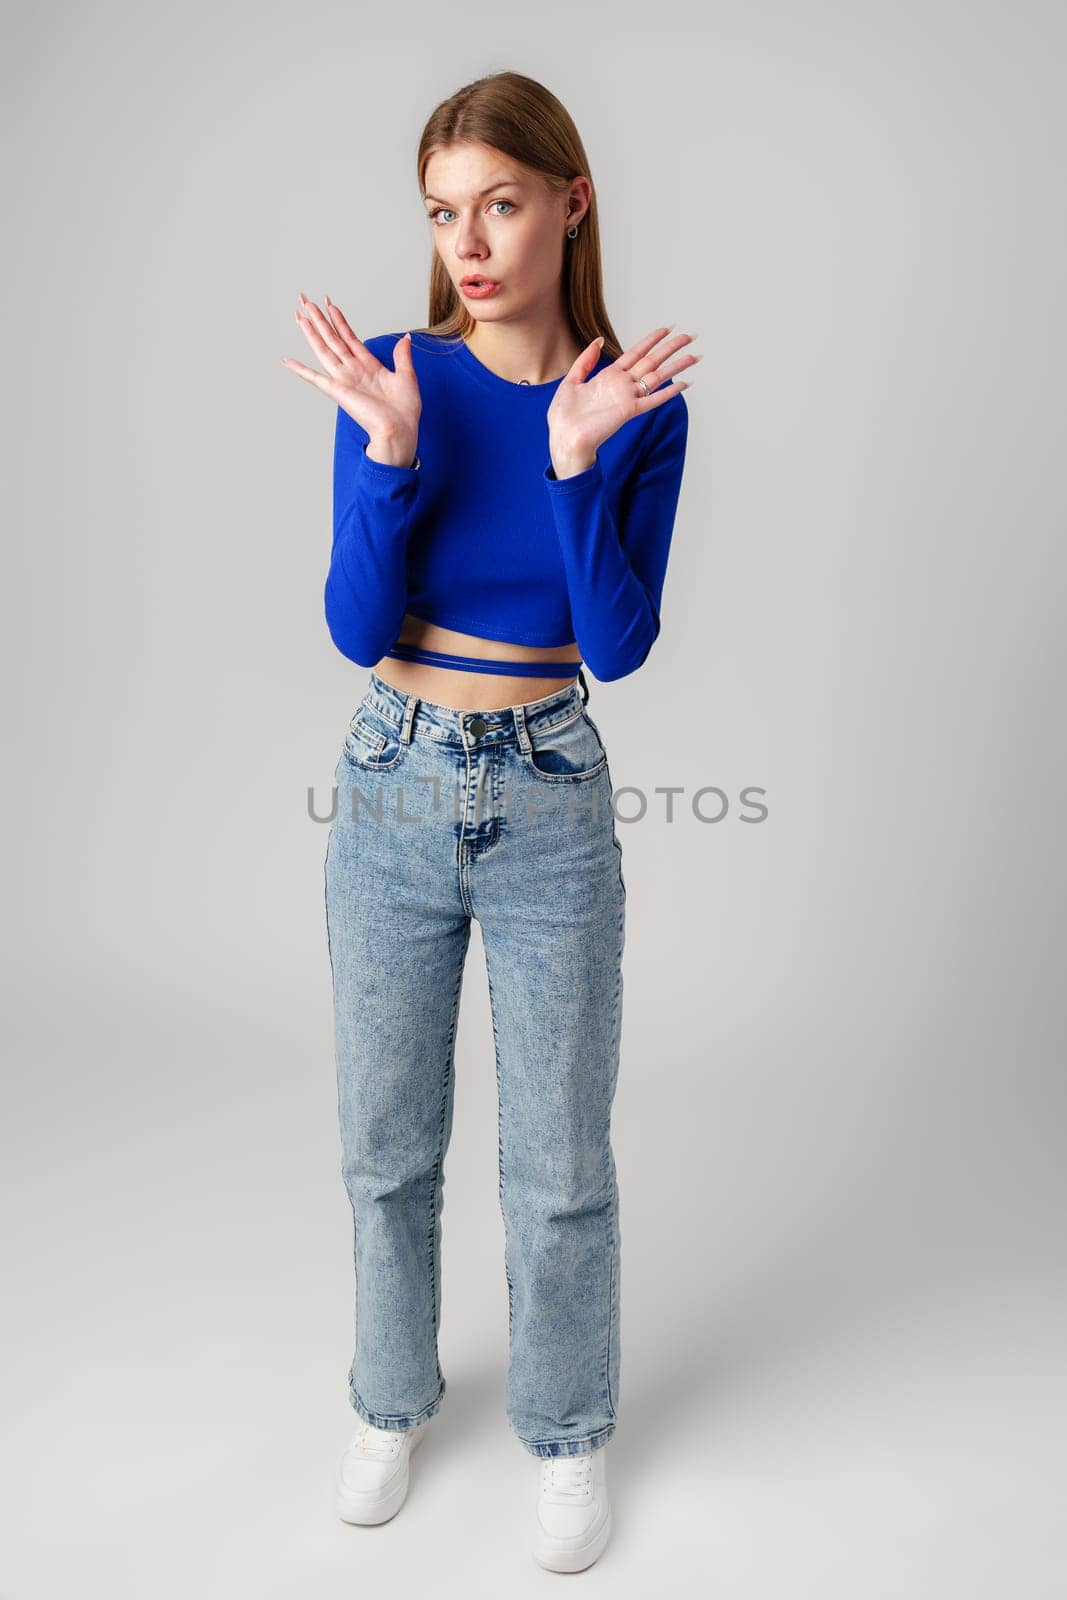 Young Woman in Blue Top Holding Out Hands by Fabrikasimf